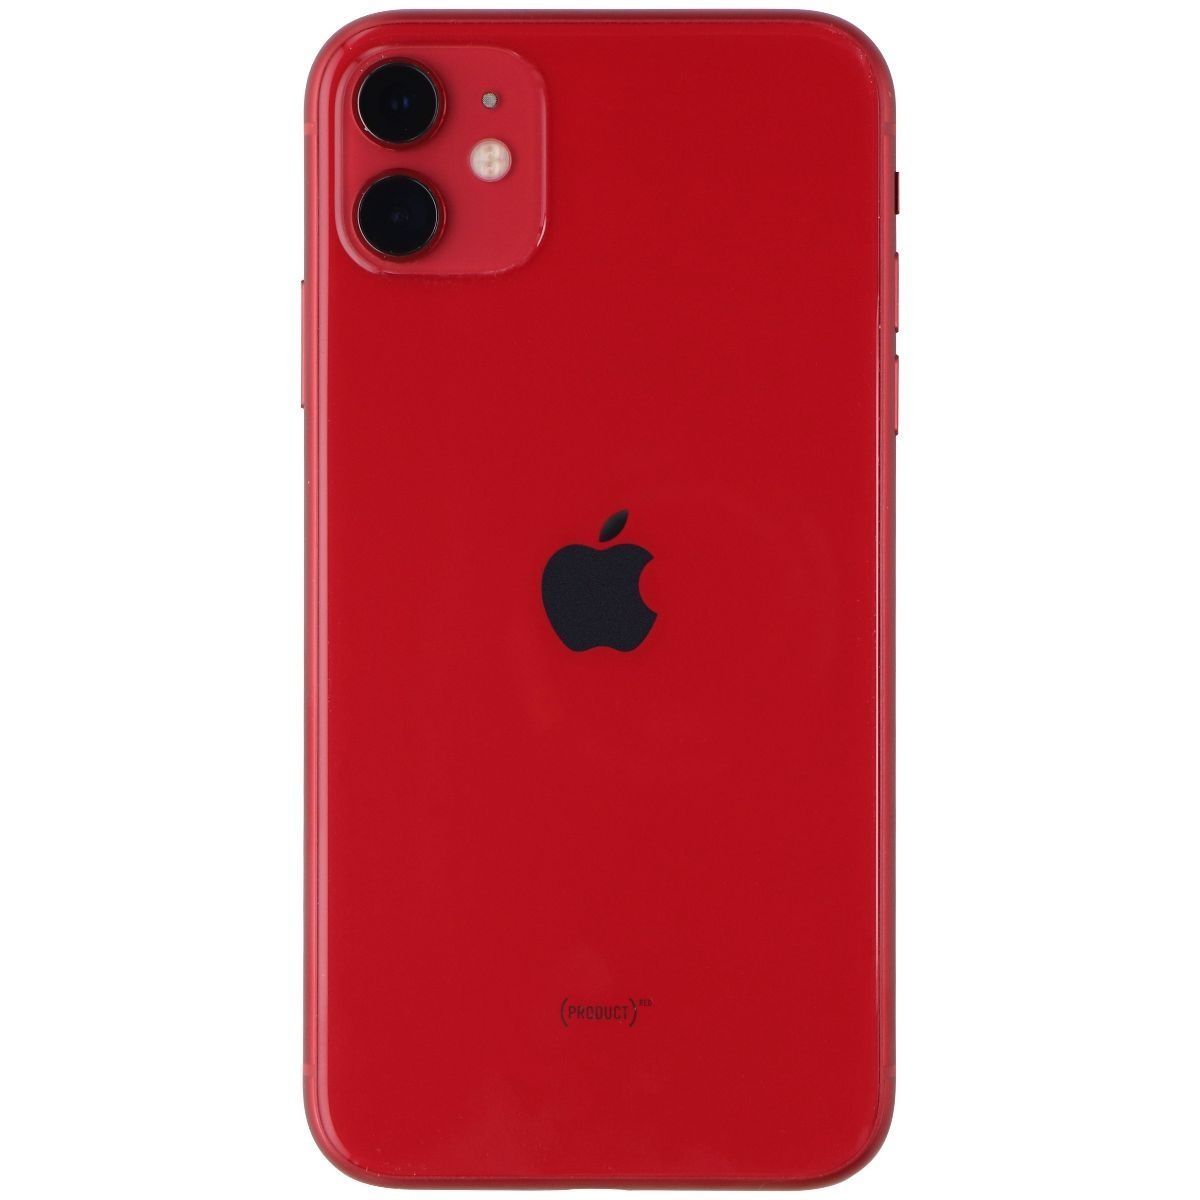 Apple iPhone 11 (6.1-inch) Smartphone (A2111) Verizon Only - 64GB / Product Red Cell Phones & Smartphones Apple    - Simple Cell Bulk Wholesale Pricing - USA Seller